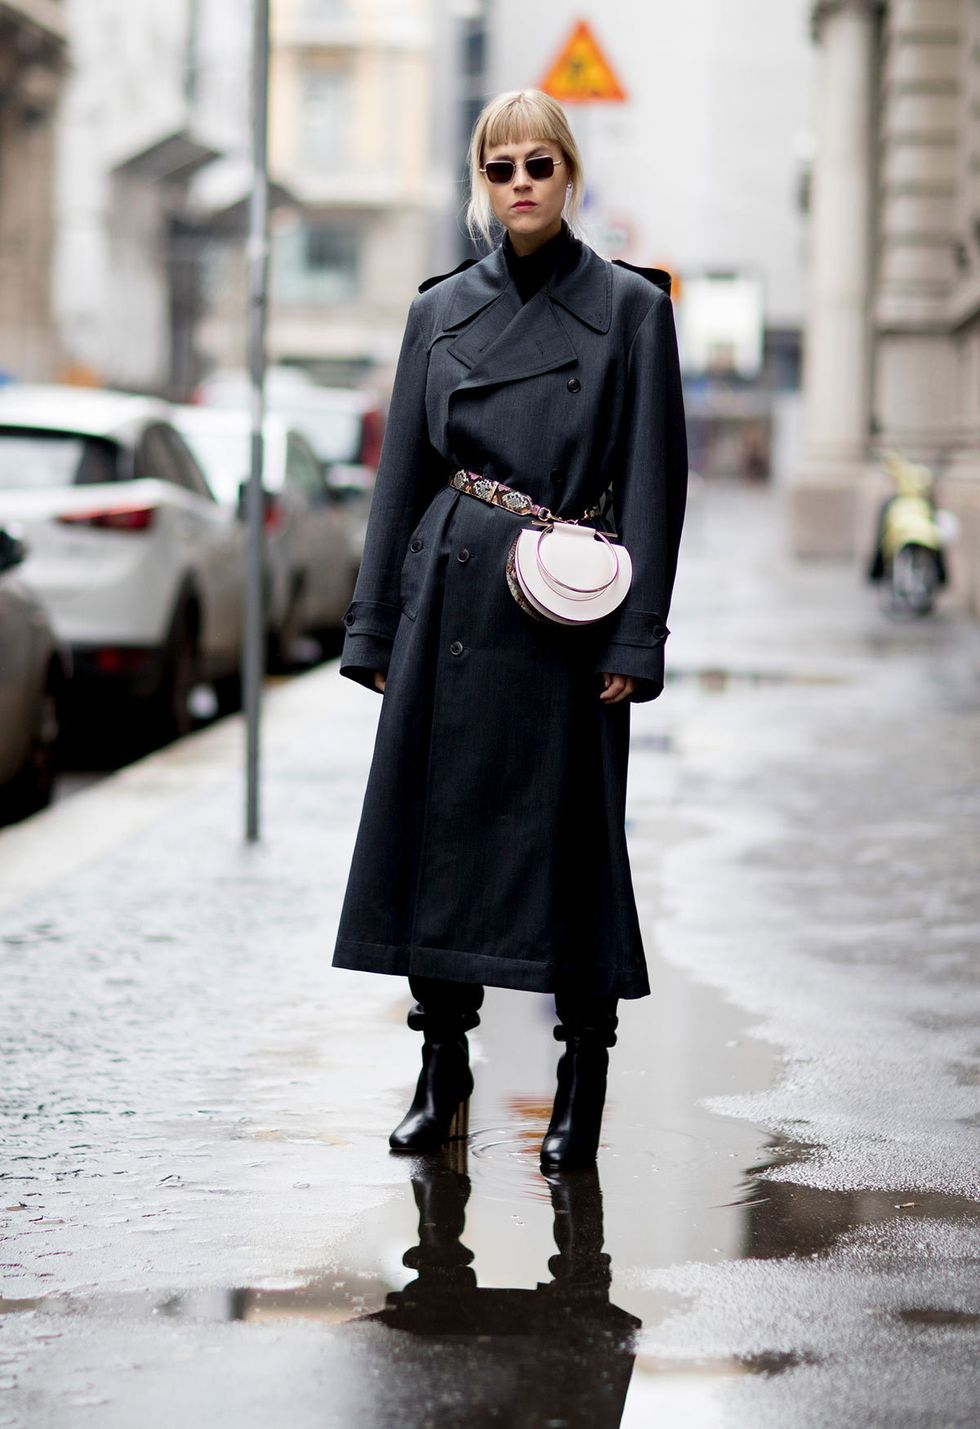 Clothing, Winter, Outerwear, Street, Style, Street fashion, Boot, Fashion, Overcoat, Knee, 